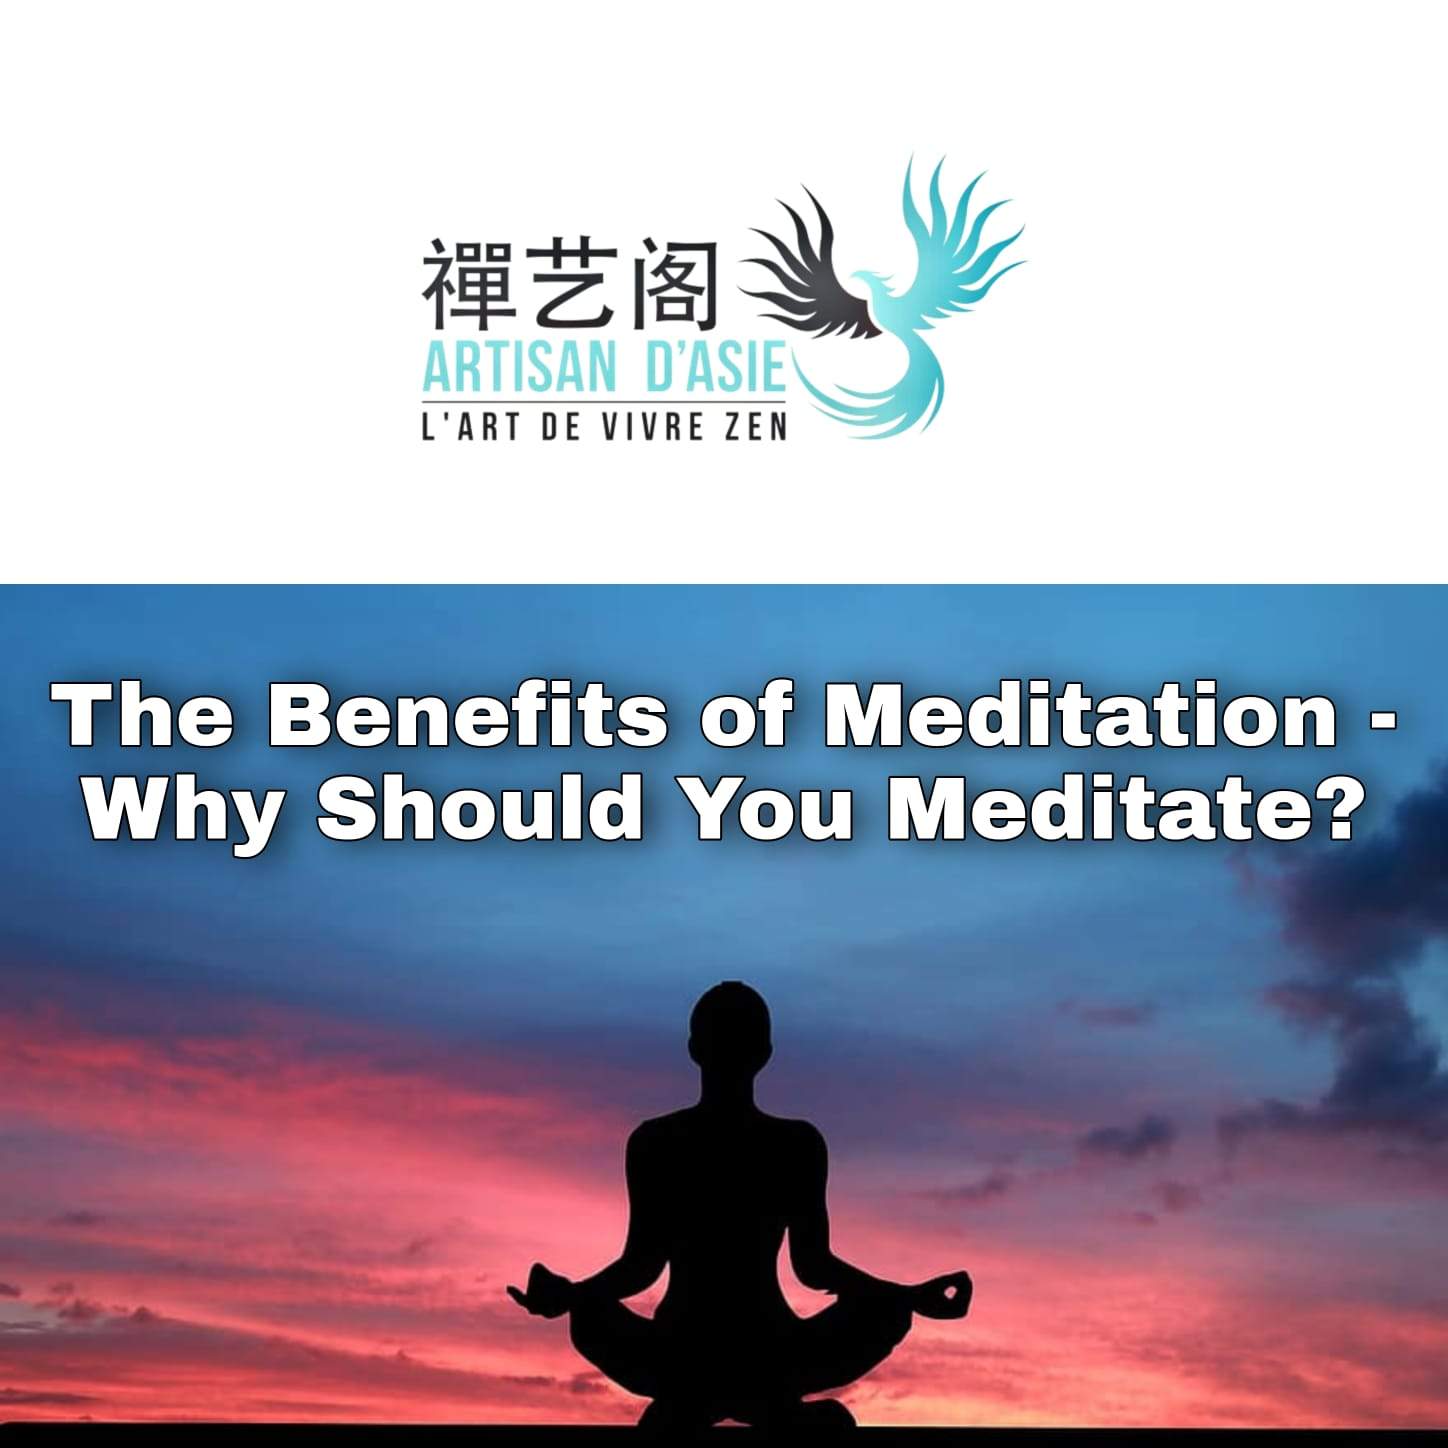 The Benefits of Meditation - Why Should You Meditate?